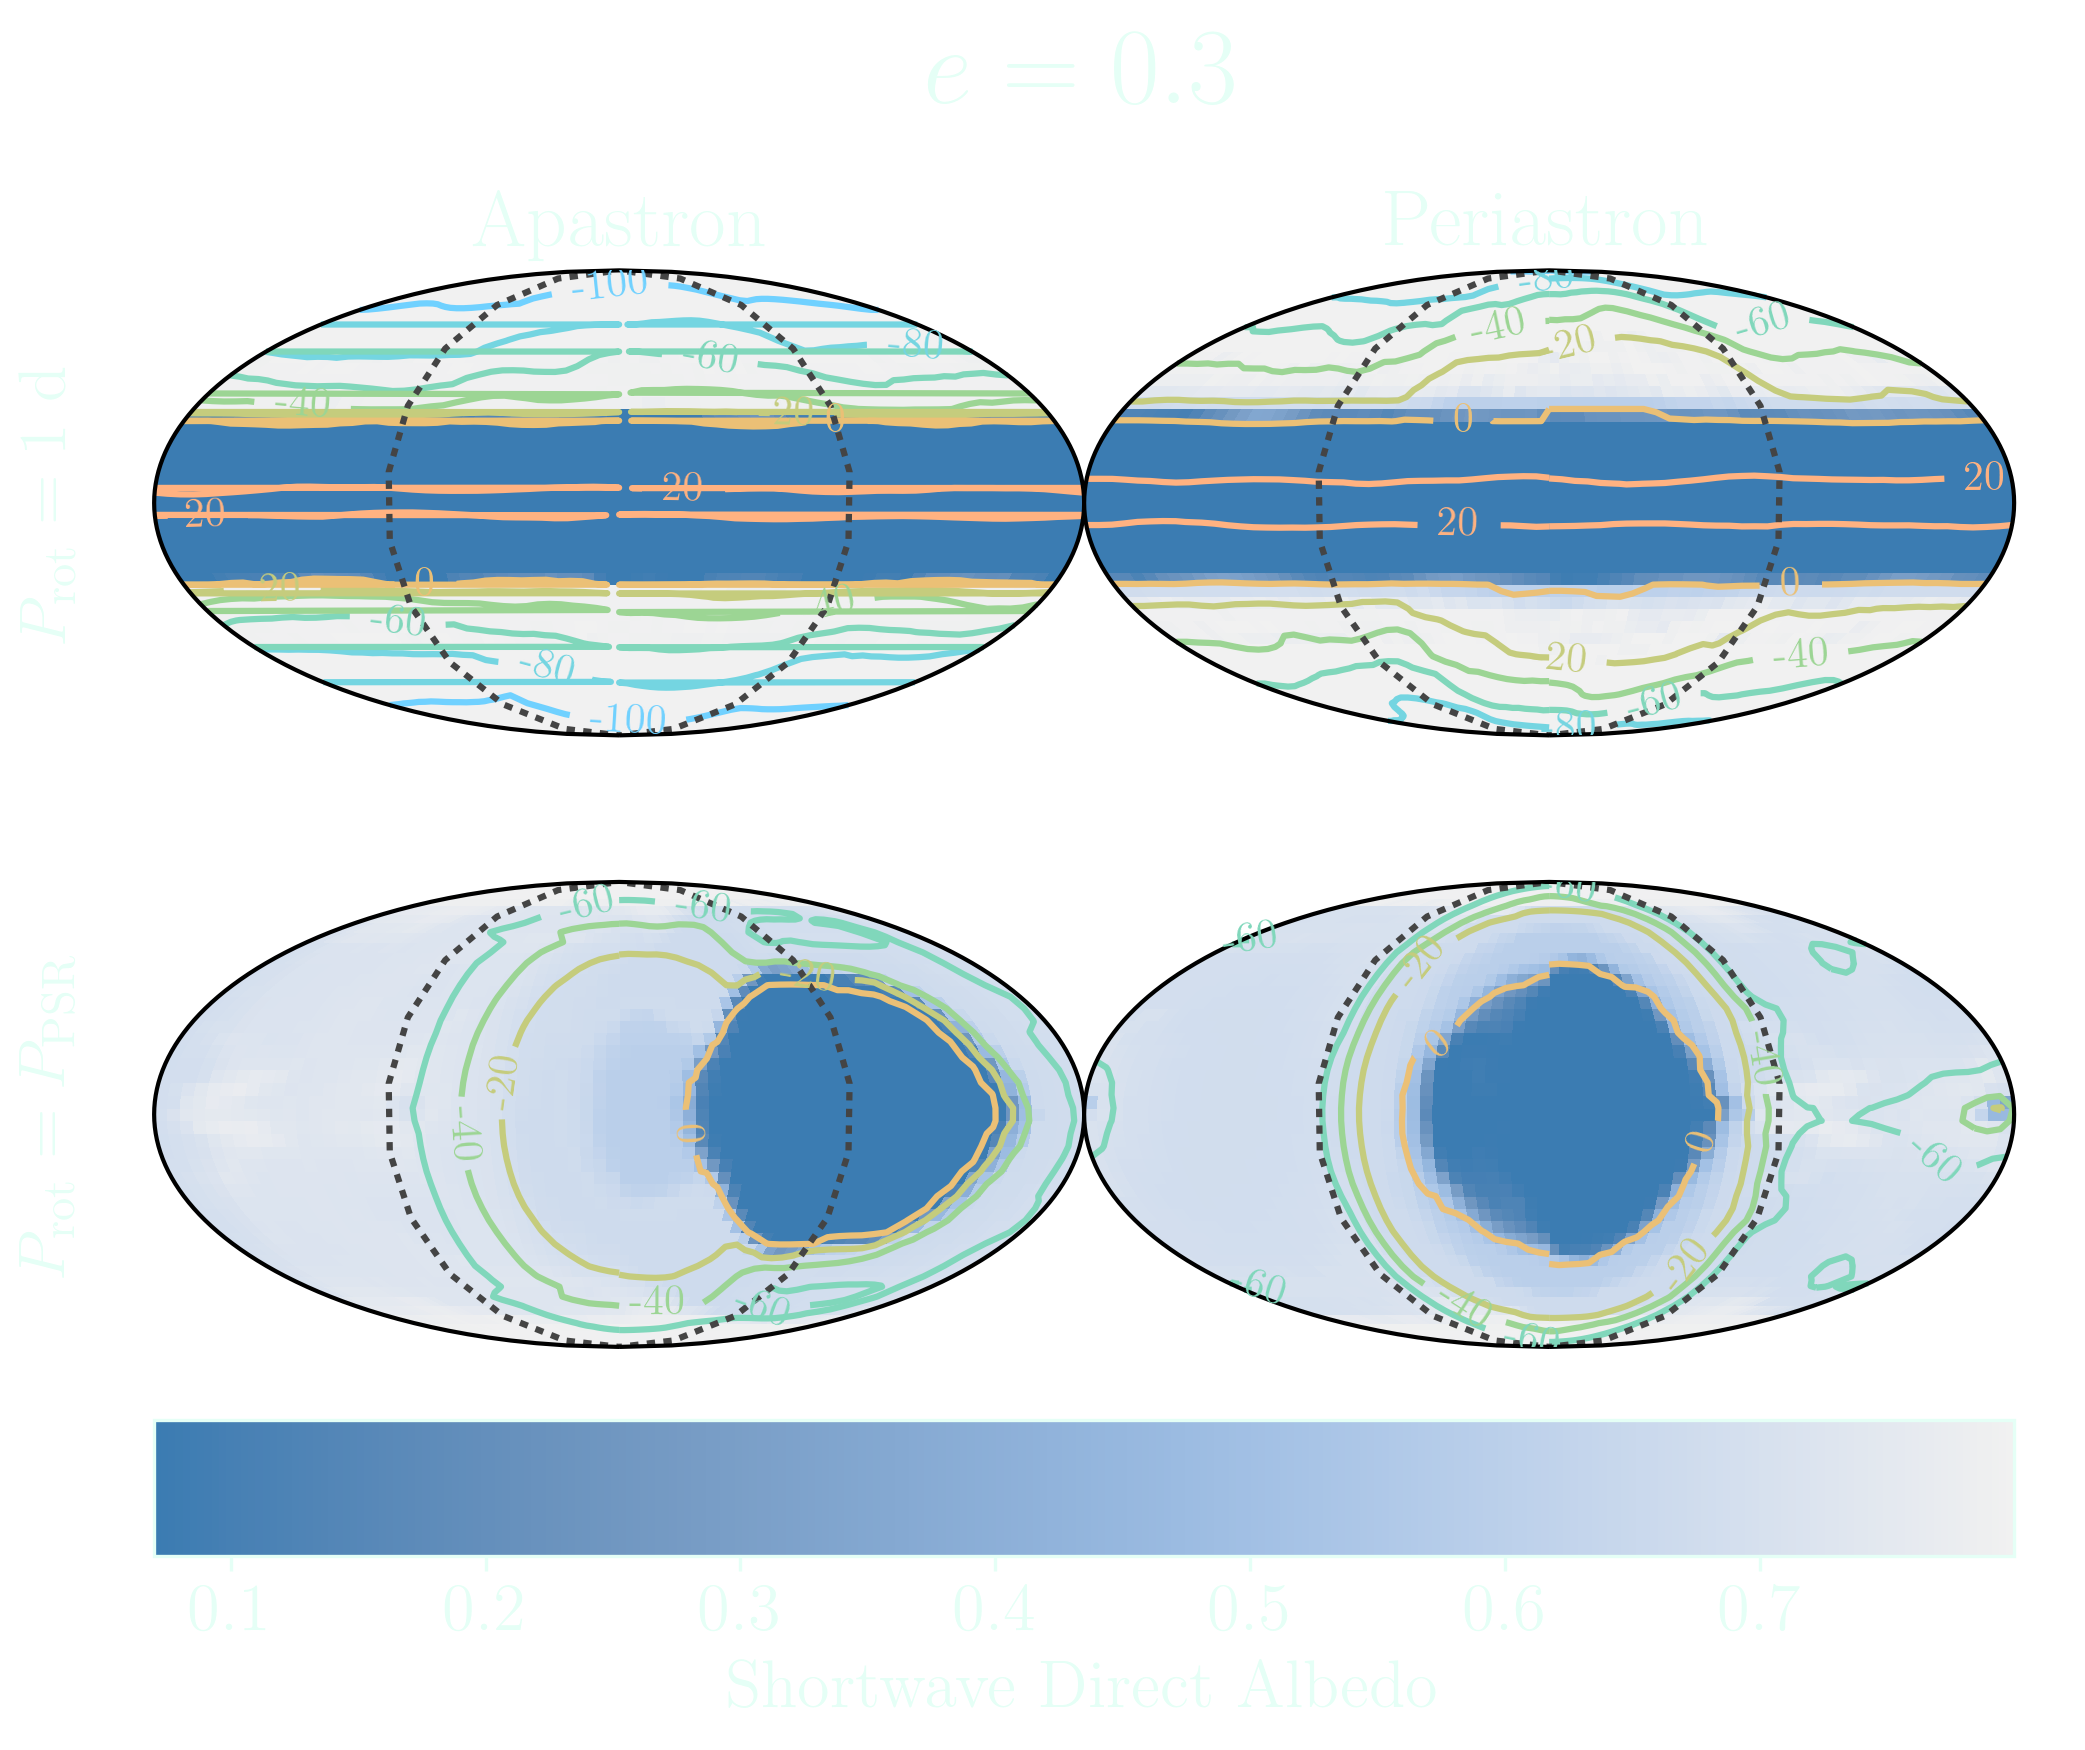 Albedo and surface temperature of eccentric ocean planets